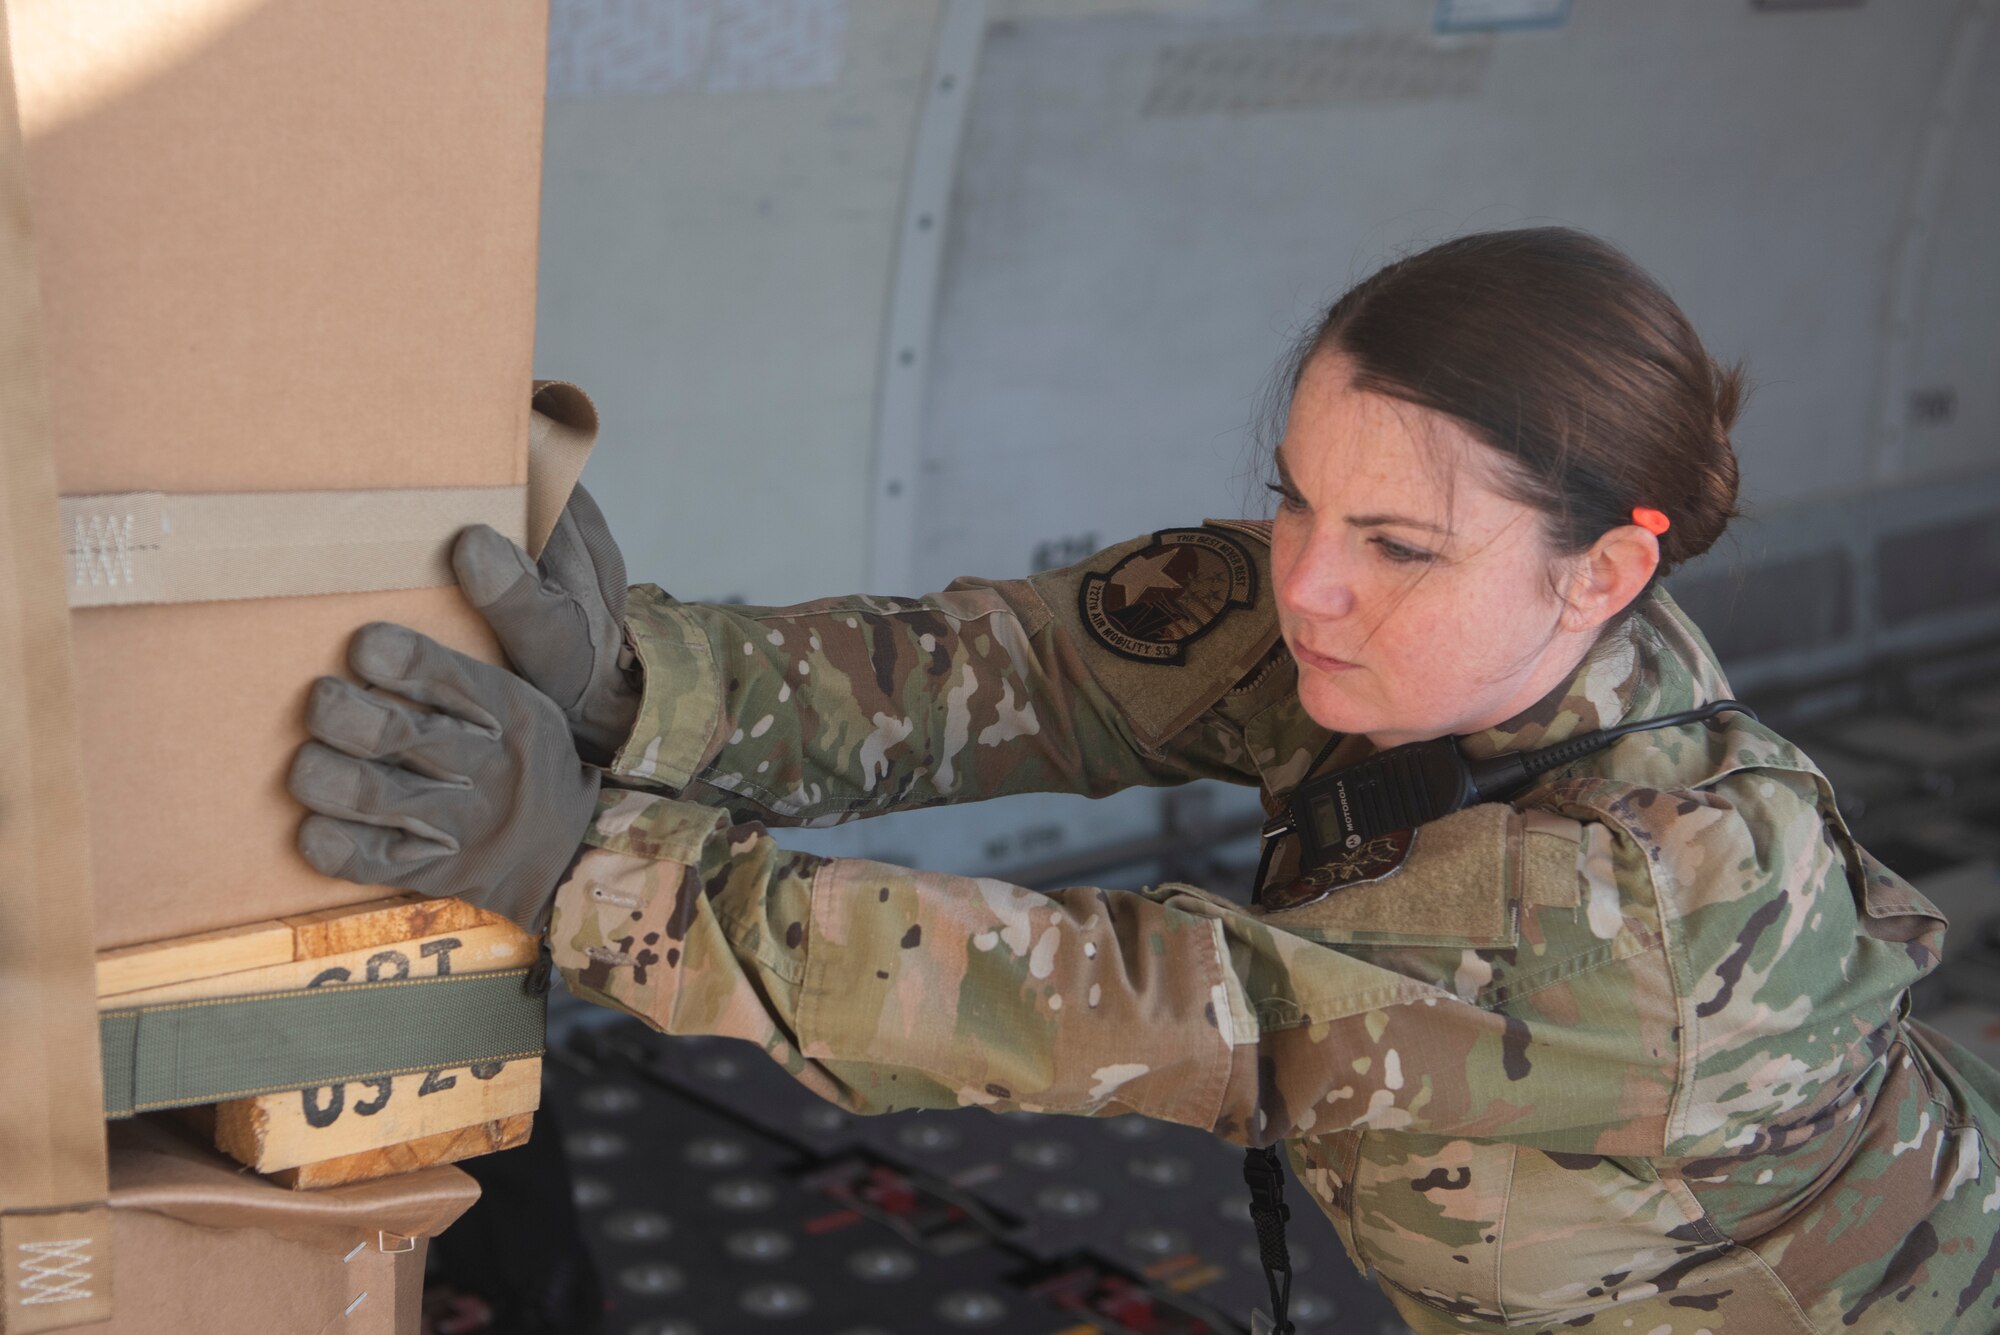 Tech. Sgt. Melissa Durkin-Willman, 727th Air Mobility Squadron noncommissioned officer in charge of passenger travels, pushes a cargo crate inside of a commercial aircraft March 24, 2020, at RAF Mildenhall, England. Air transportation Airmen must often rearrange cargo, as not all assets on board an aircraft are destined for the same location. (U.S. Air Force photo by Airman 1st Class Joseph Barron)